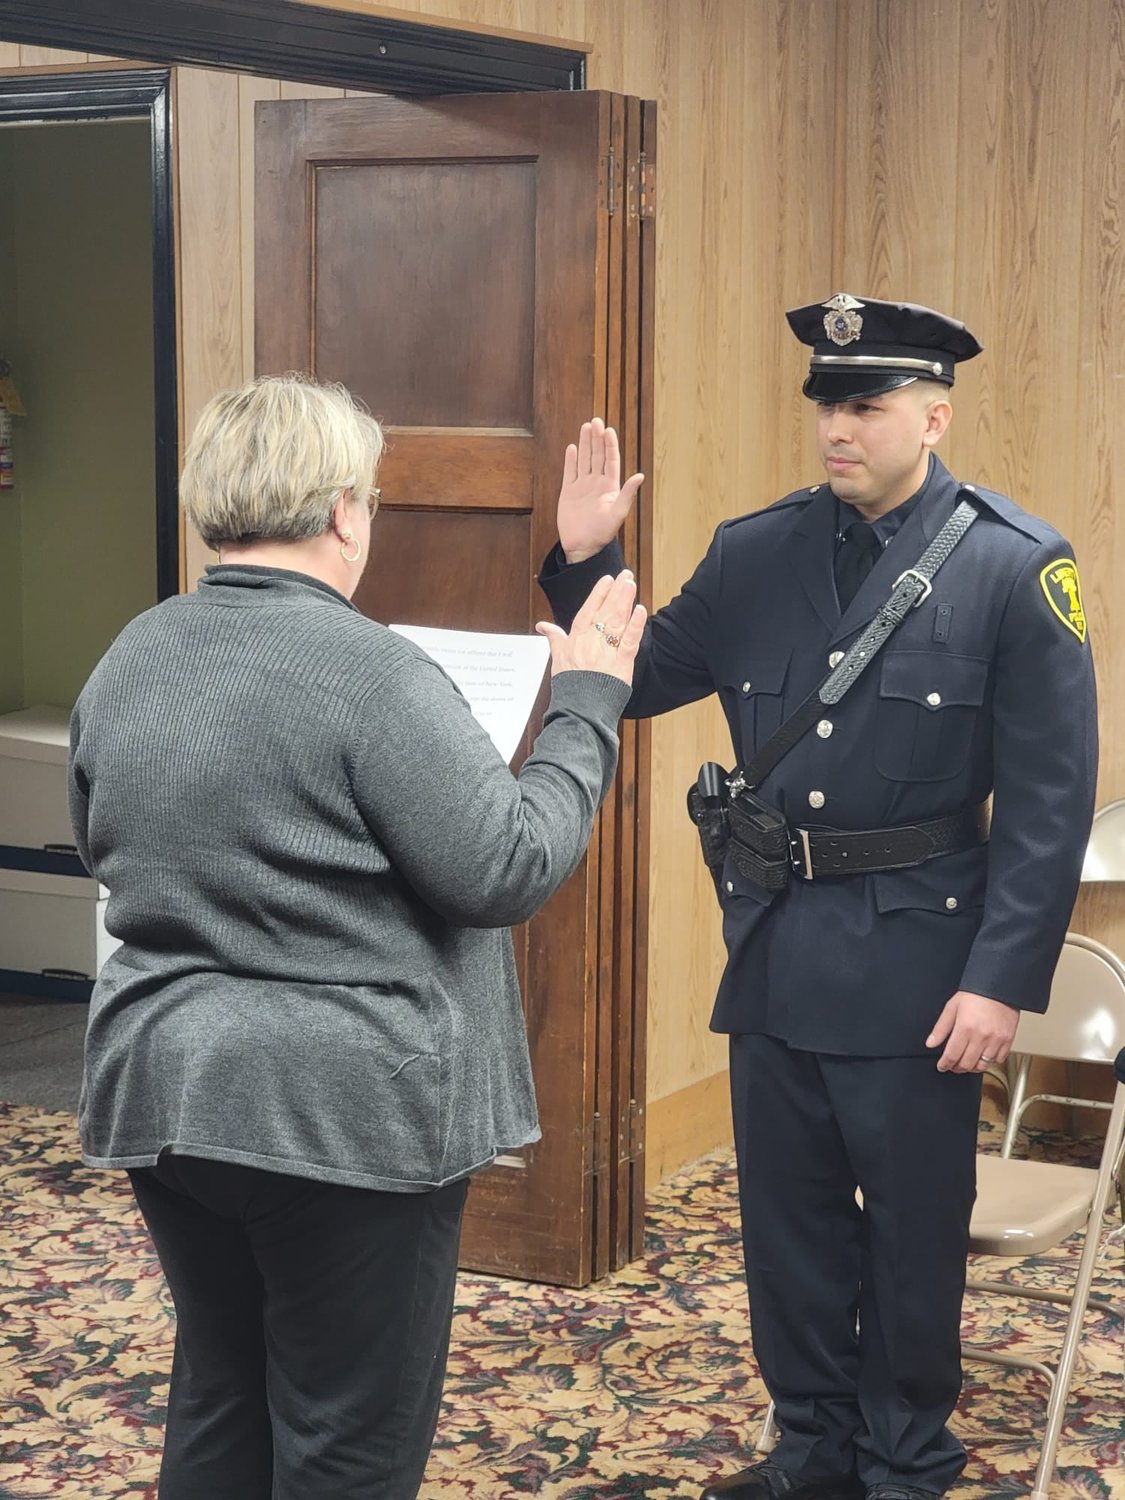 Village of Liberty Mayor Joan Stoddard administers the oath of office to Officer Anthony Ventura on Thursday last week.